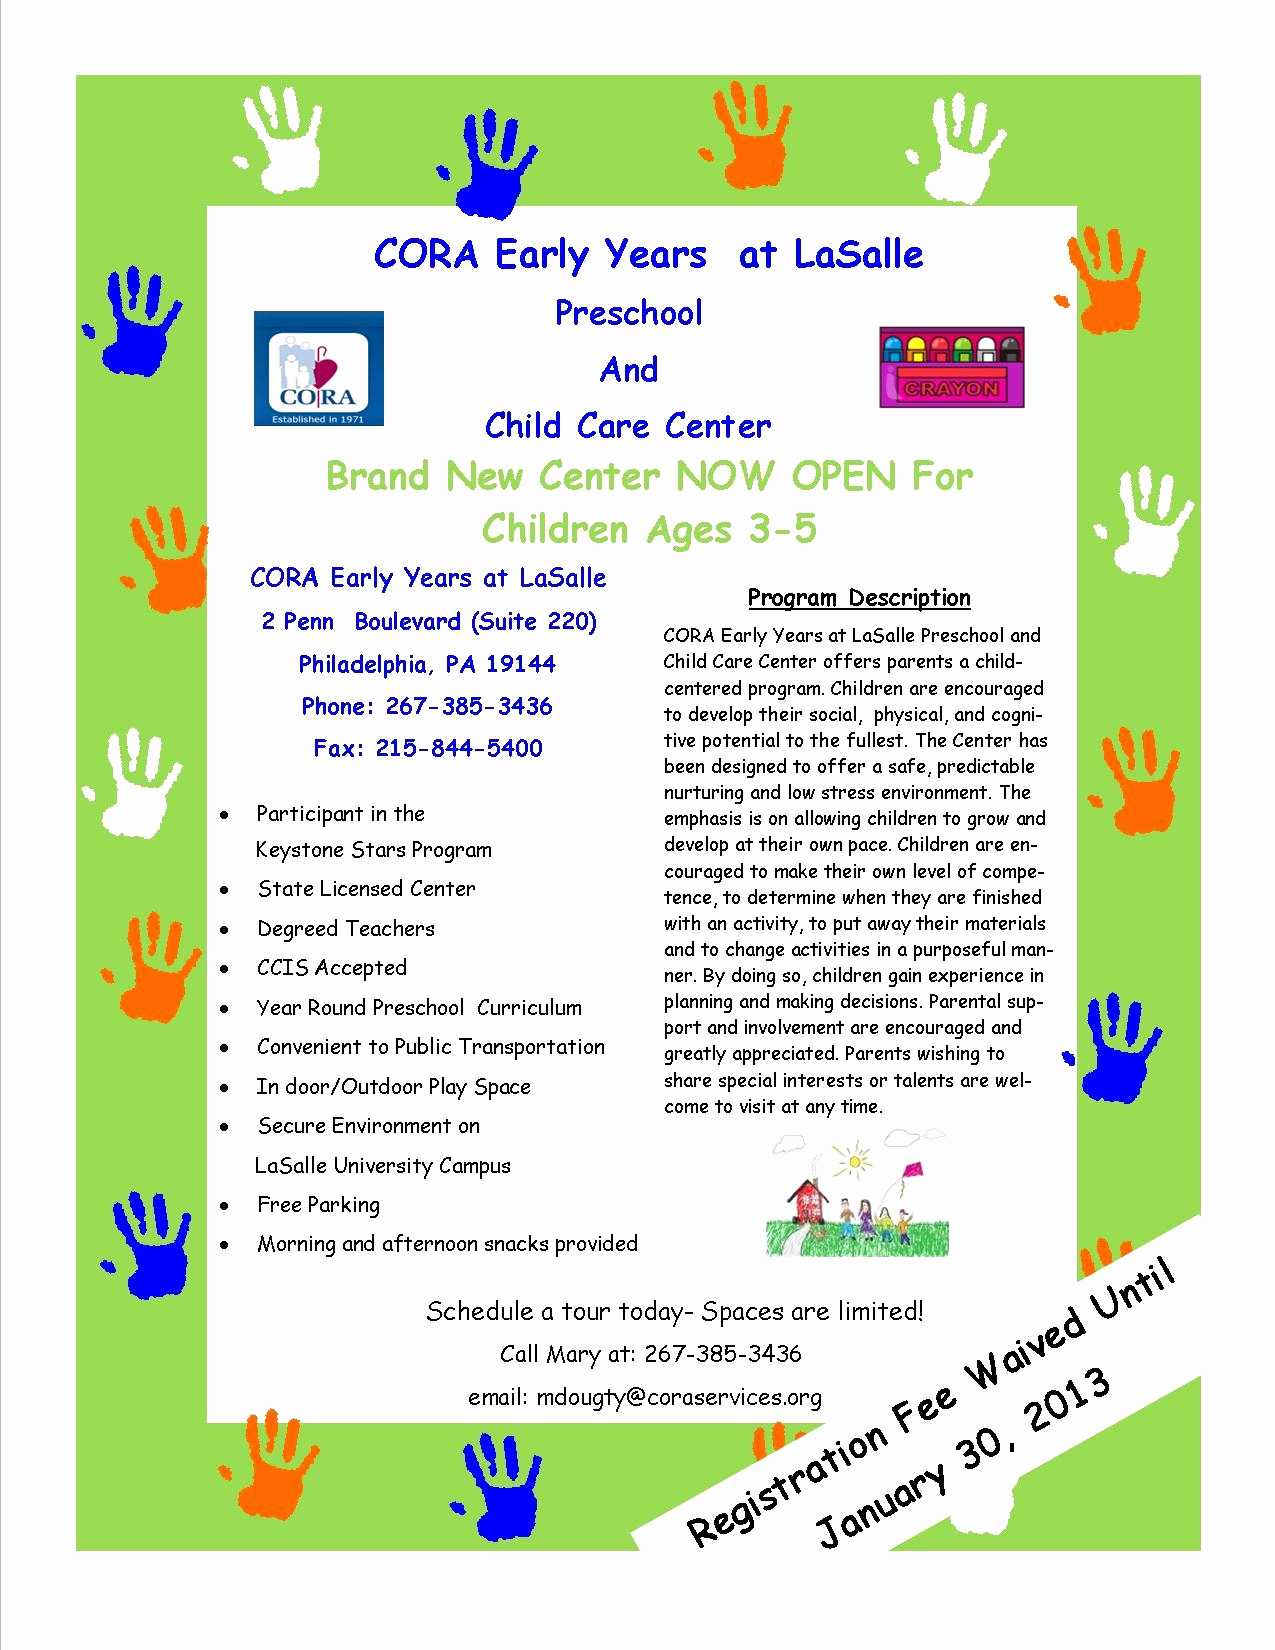 Daycare Flyers Templates Free